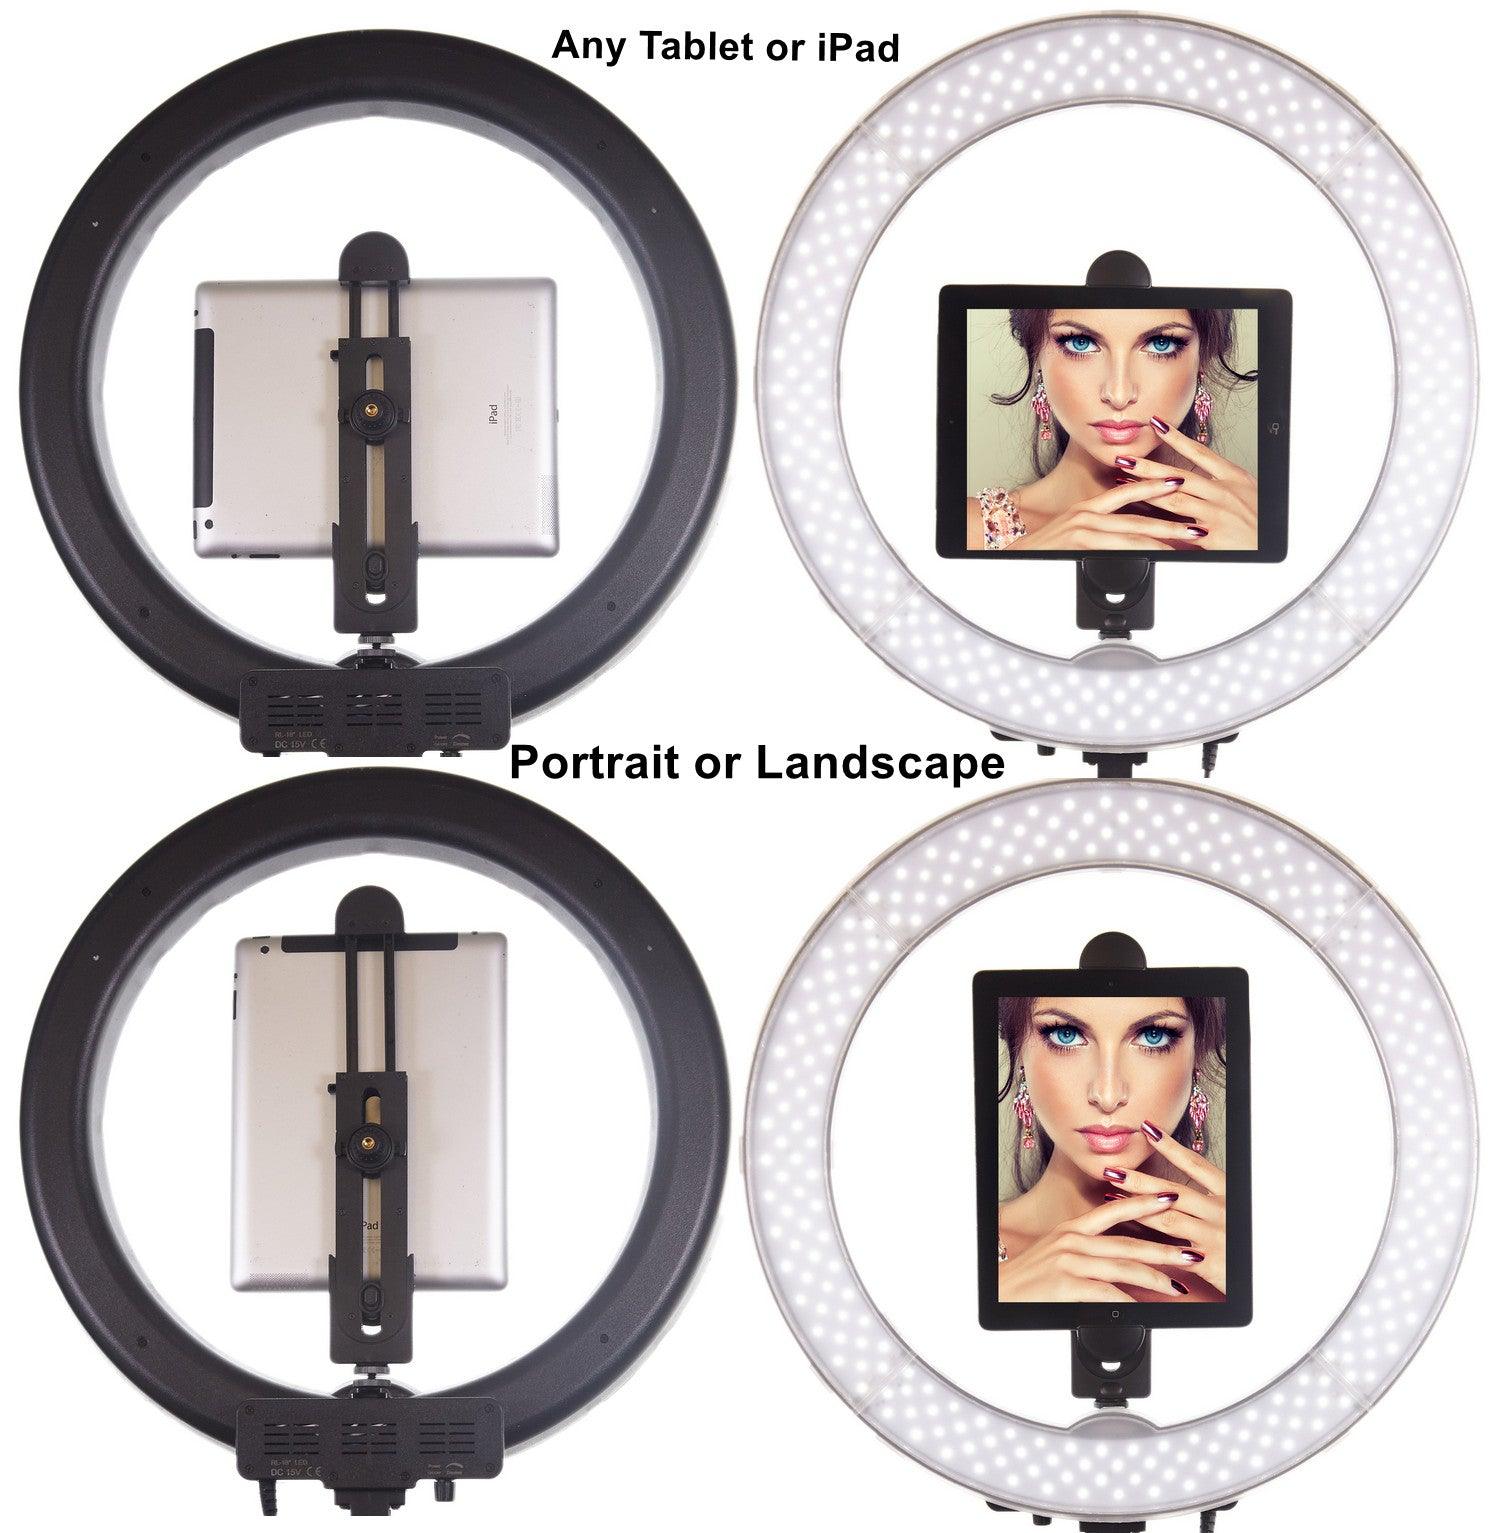 ring light with iPad portrait or landscape